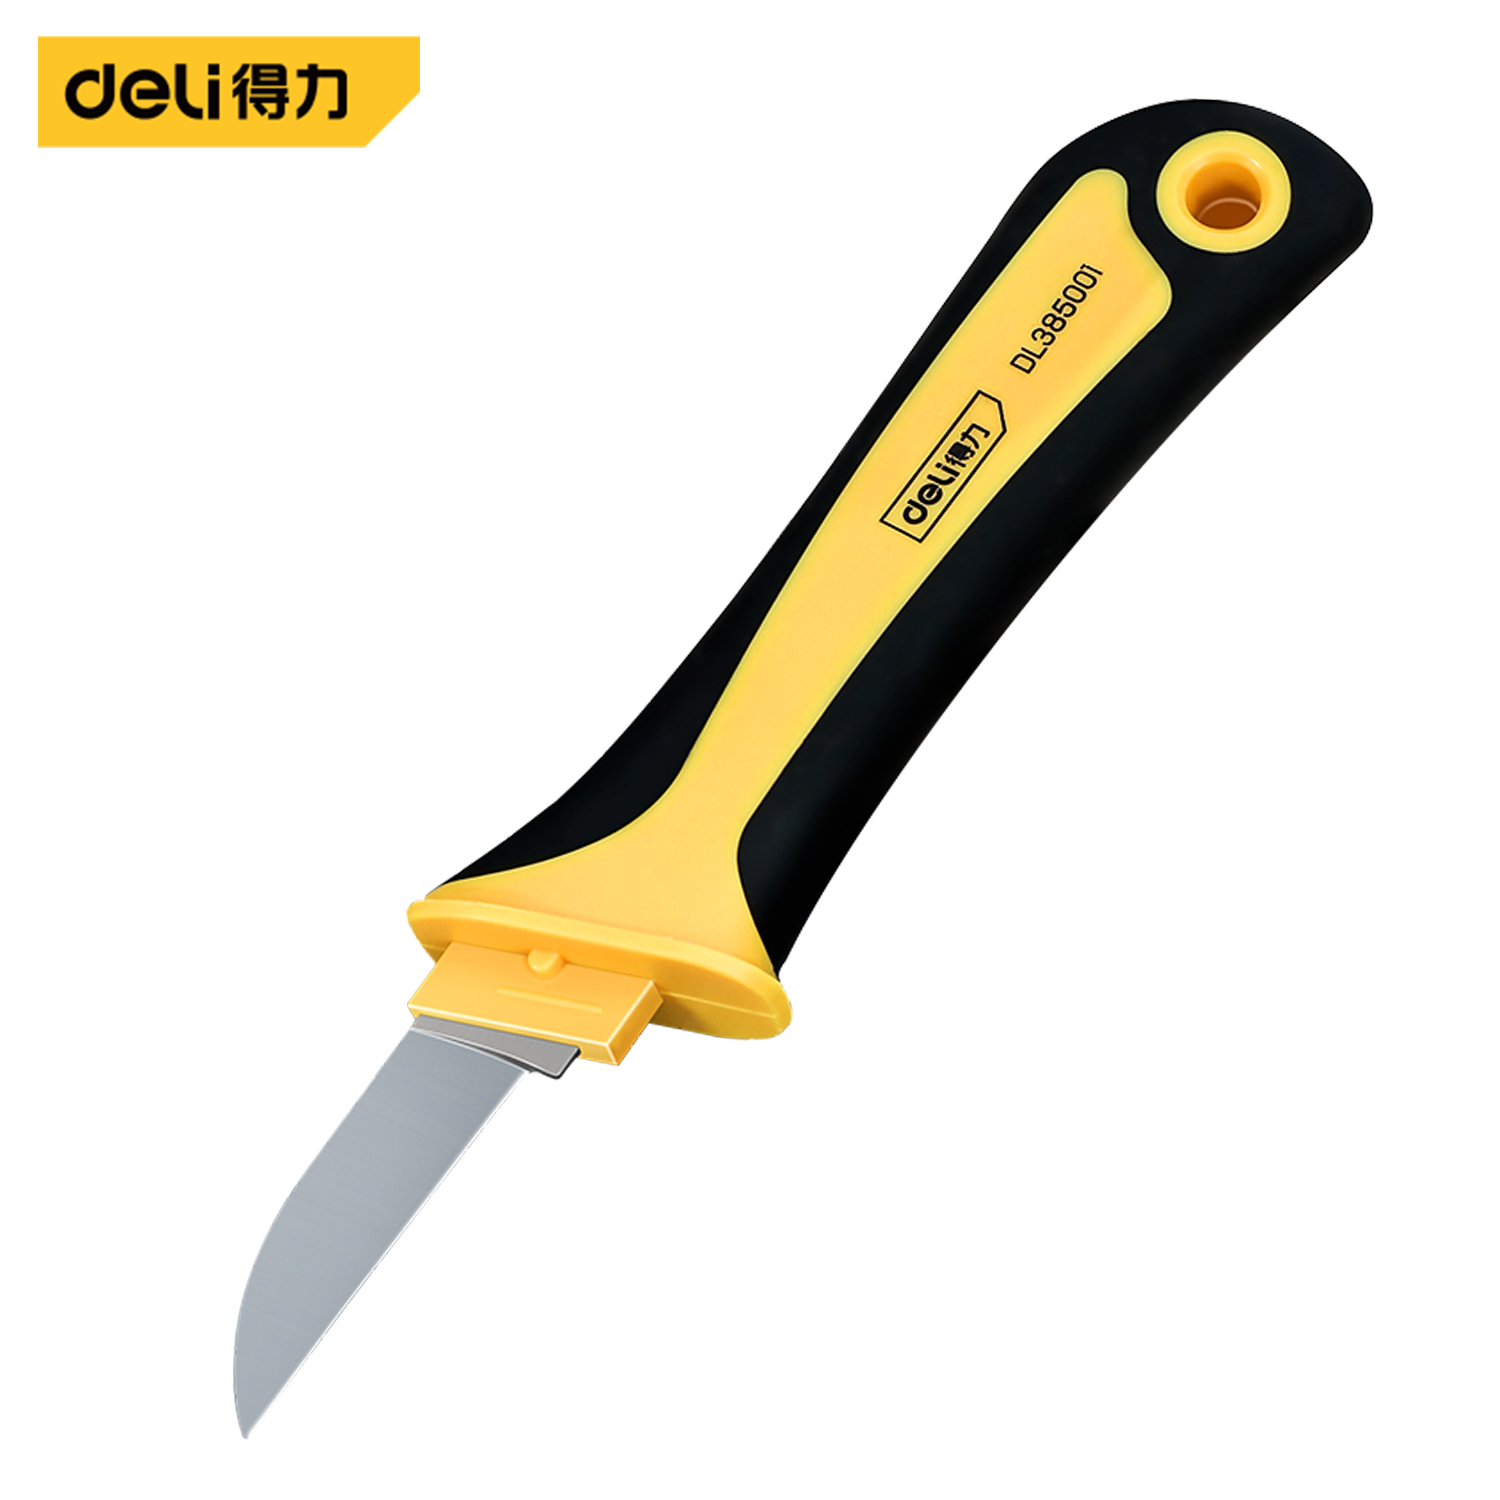 Deli-DL385001 Cable Cutter